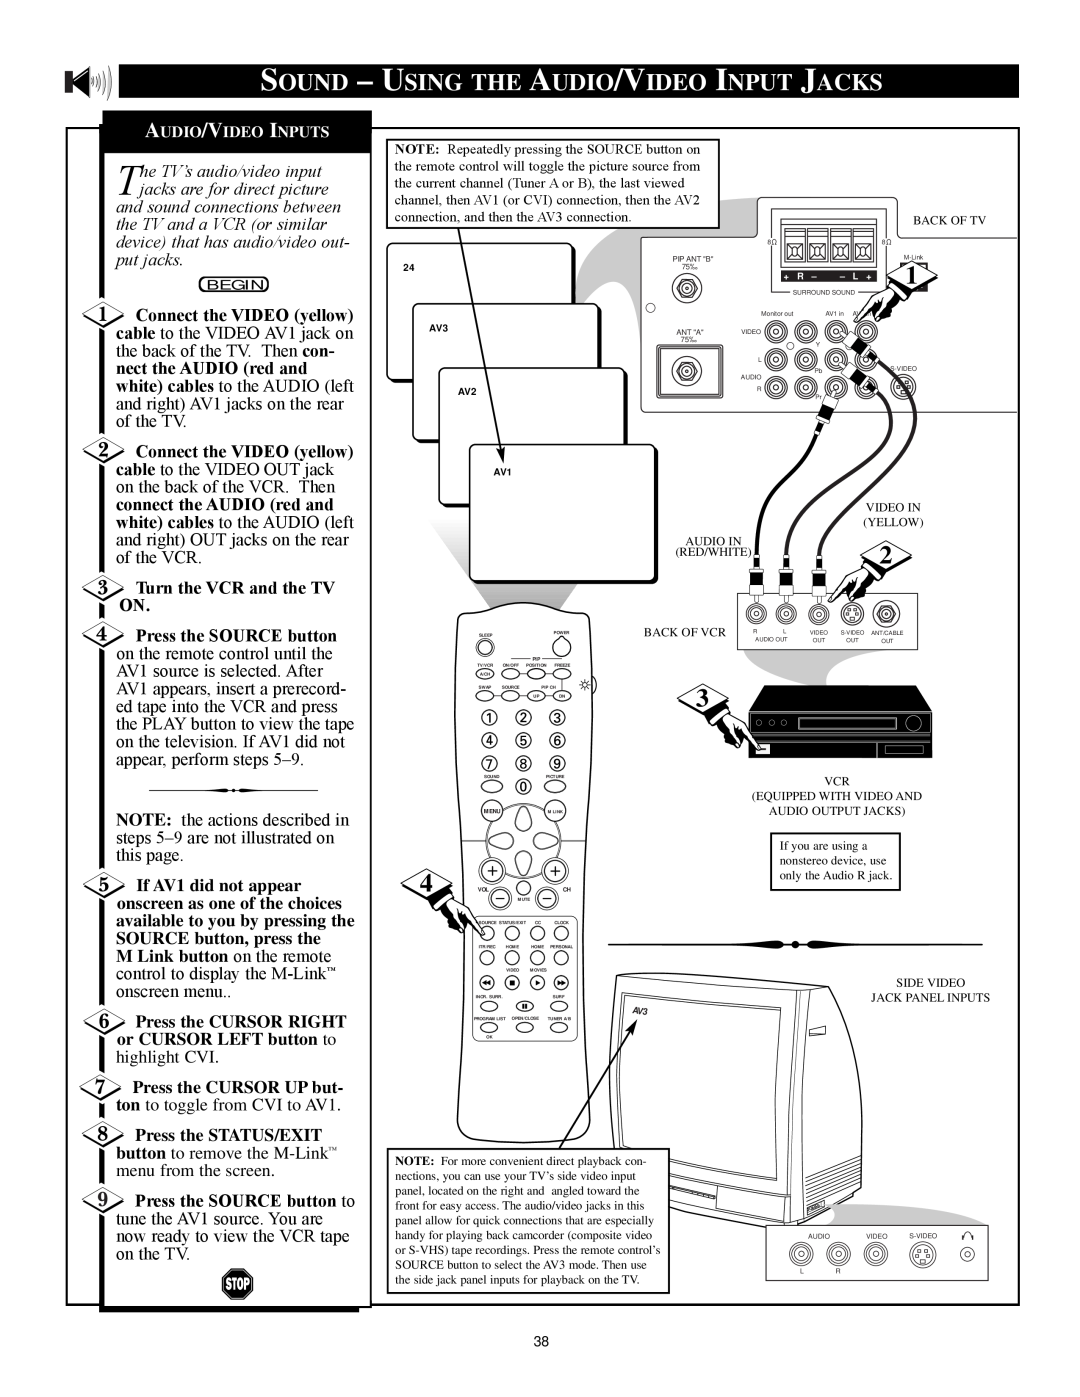 Philips 27PT71B1 manual Sound - Using The Audio/Video Input Jacks, Turn the VCR and the TV ON, Press the SOURCE button 